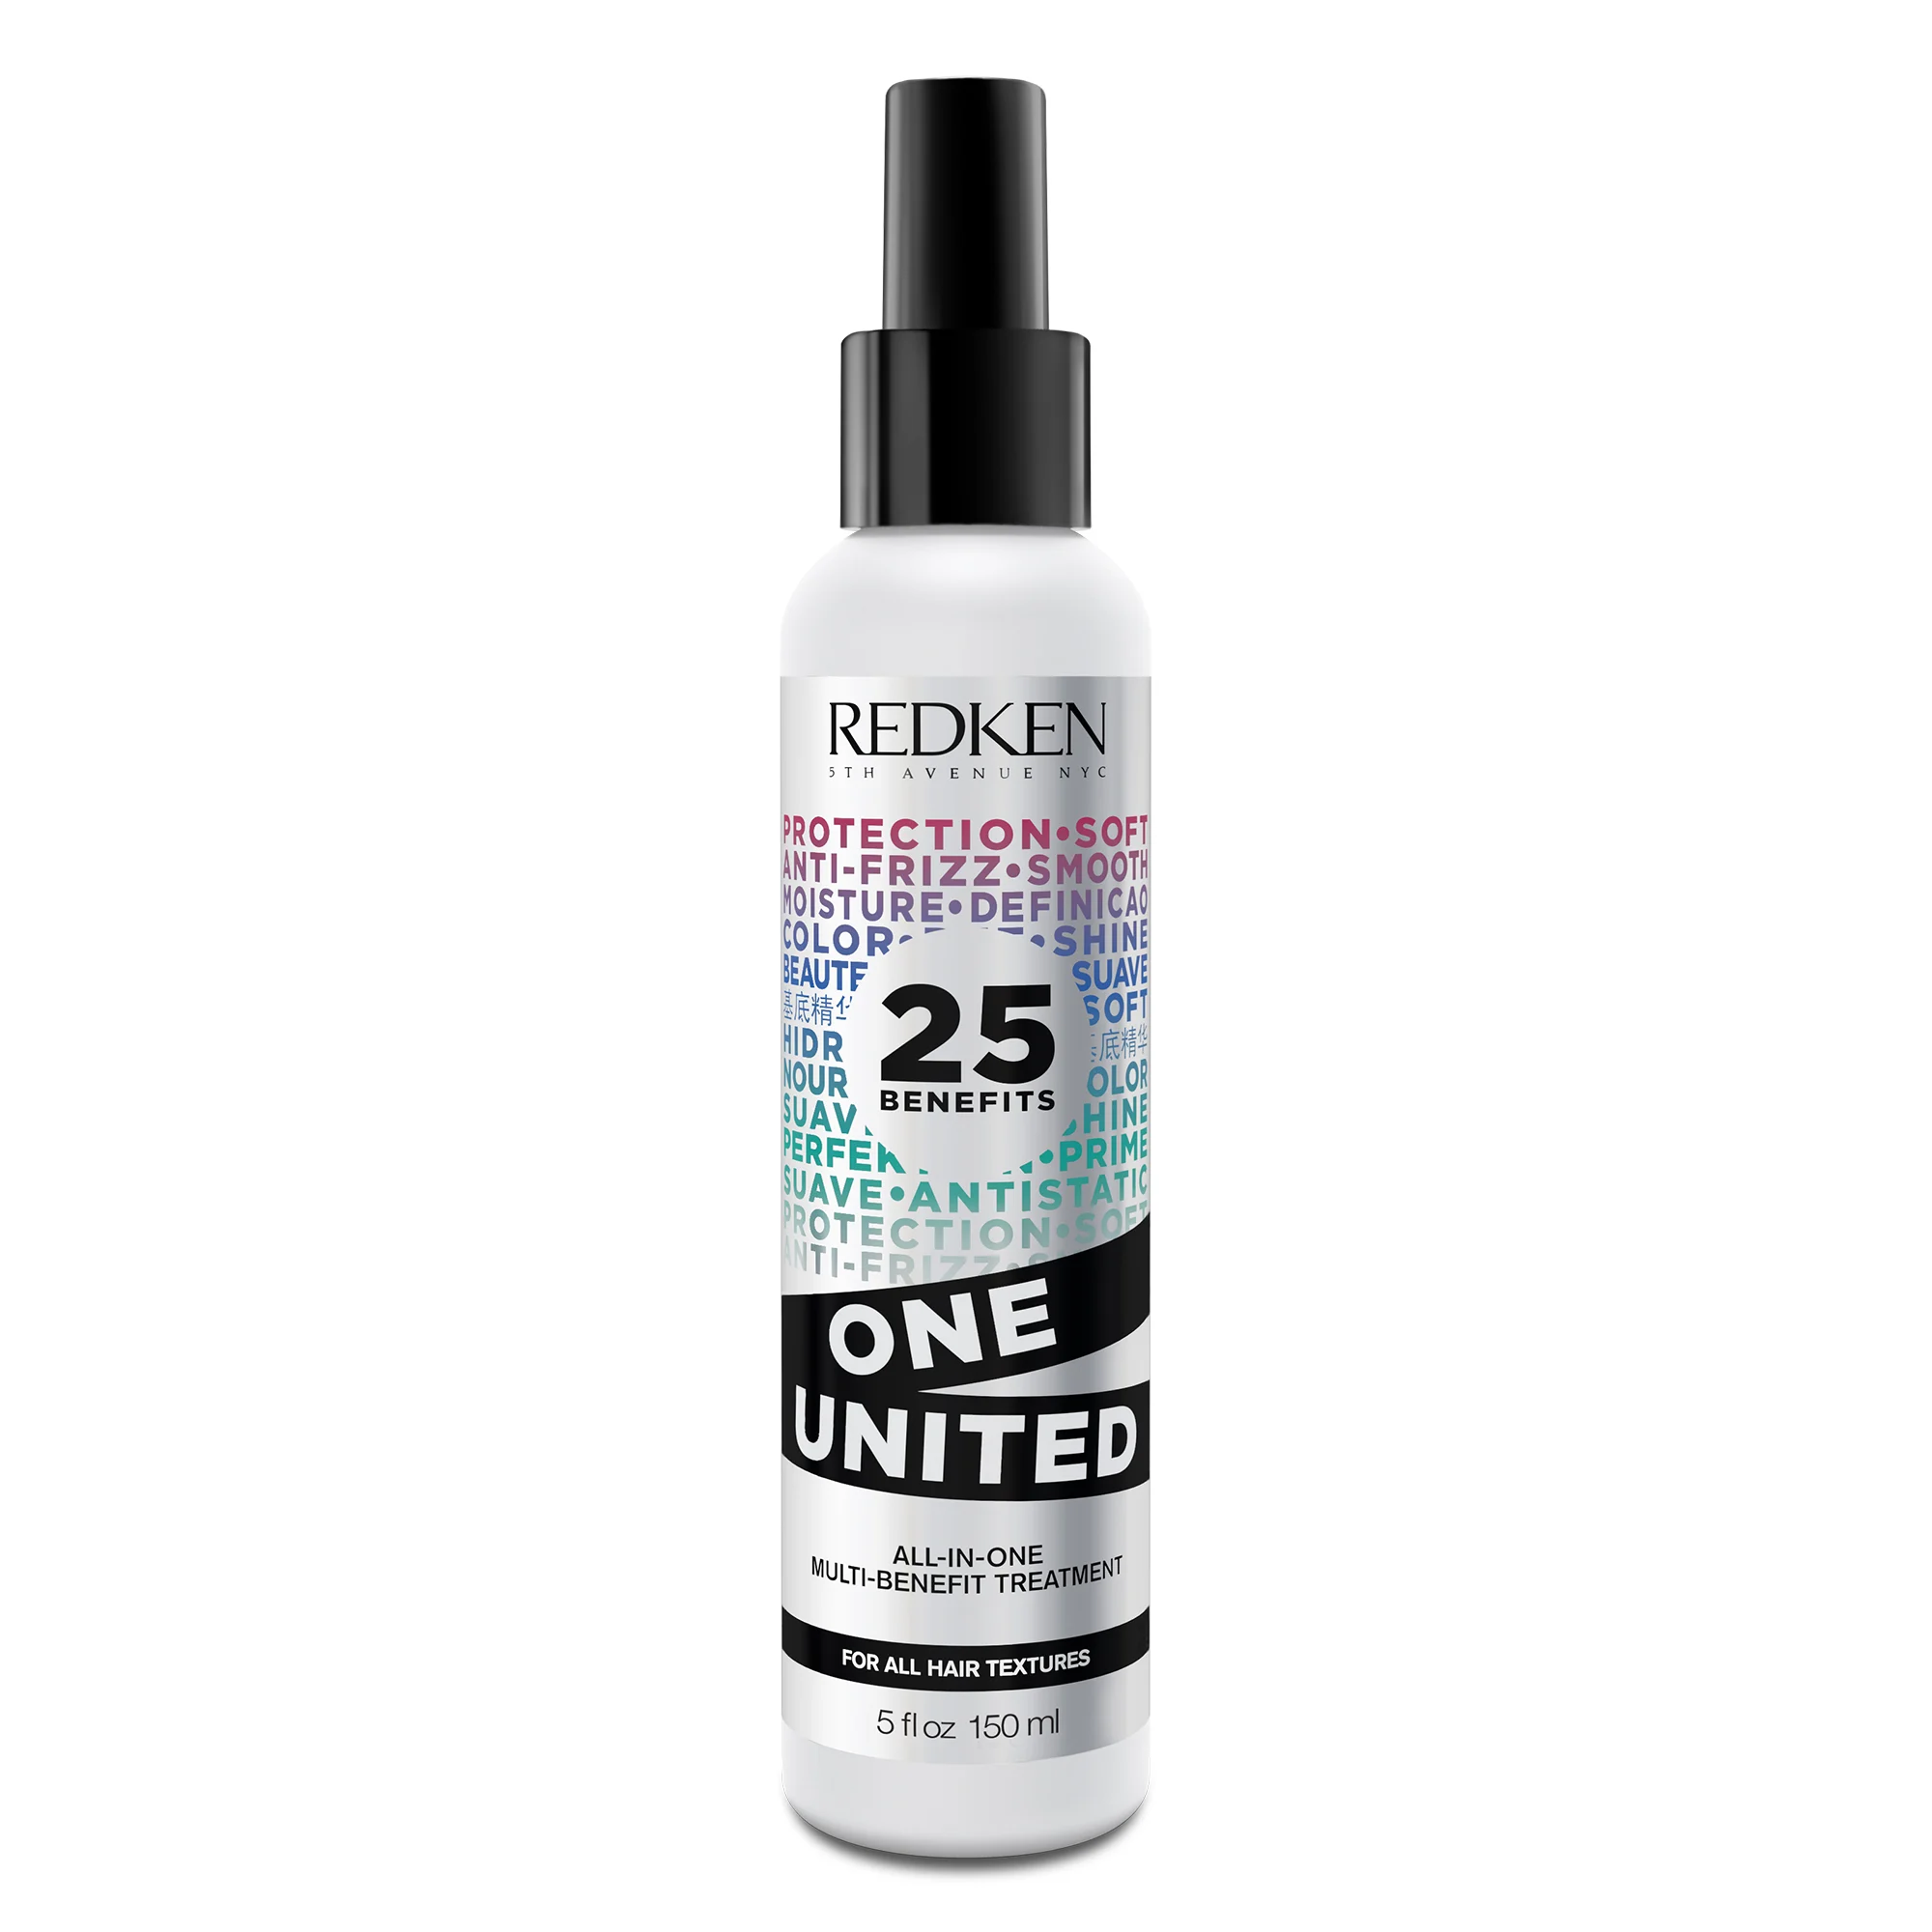 A tied FEMMENORDIC's choice in the Redken vs Pureology treatment comparison, Redken One United Leave-in Conditioner